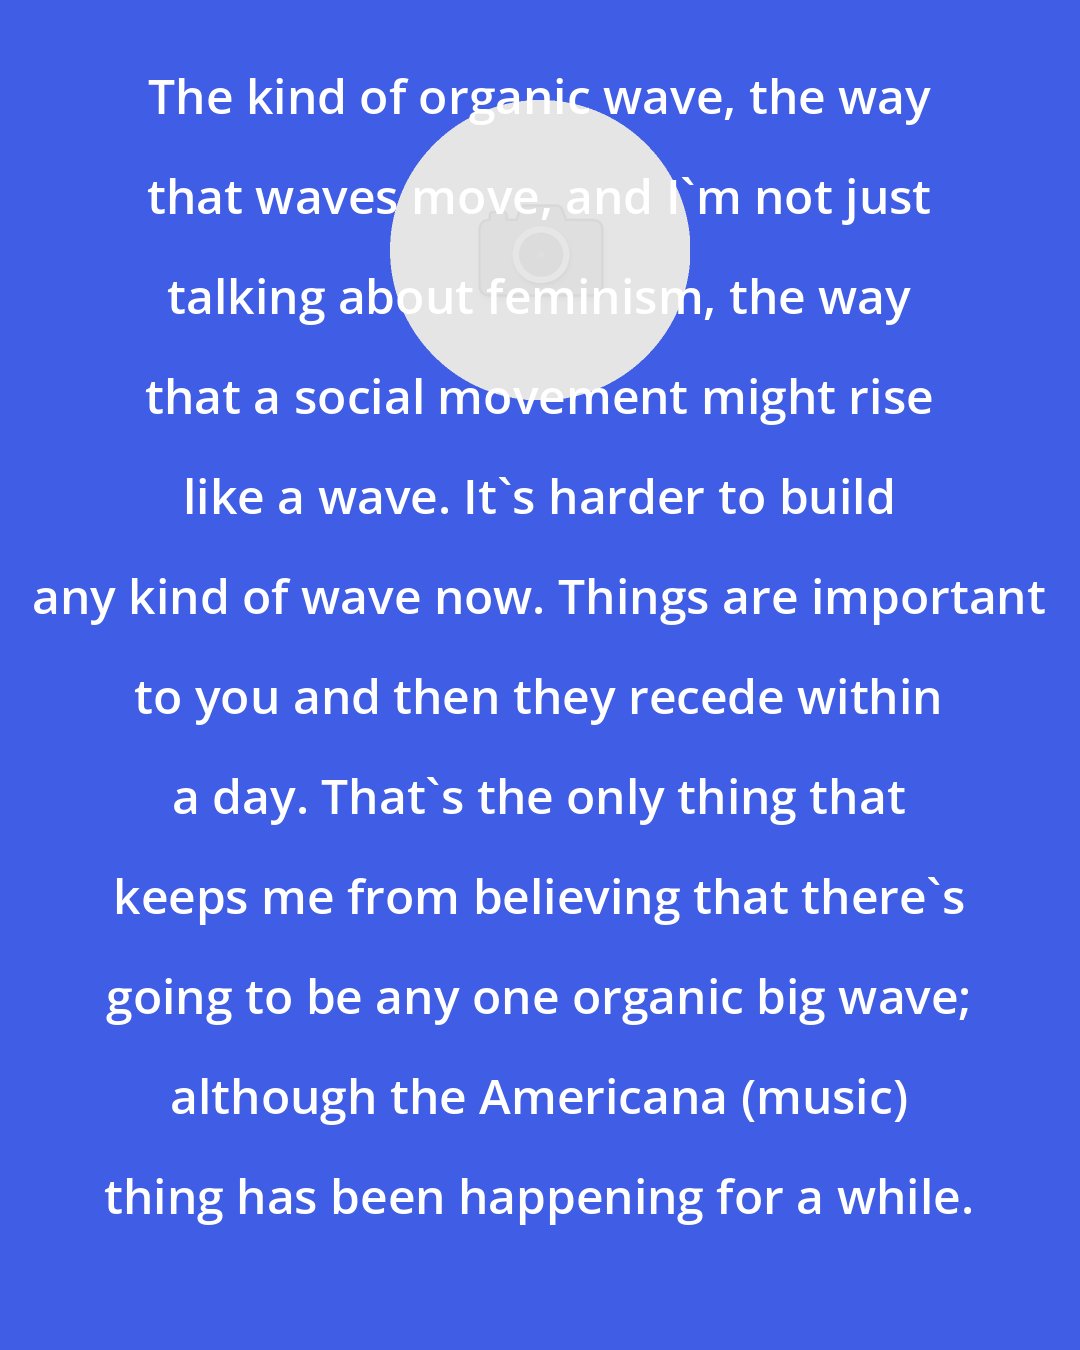 Dar Williams: The kind of organic wave, the way that waves move, and I'm not just talking about feminism, the way that a social movement might rise like a wave. It's harder to build any kind of wave now. Things are important to you and then they recede within a day. That's the only thing that keeps me from believing that there's going to be any one organic big wave; although the Americana (music) thing has been happening for a while.